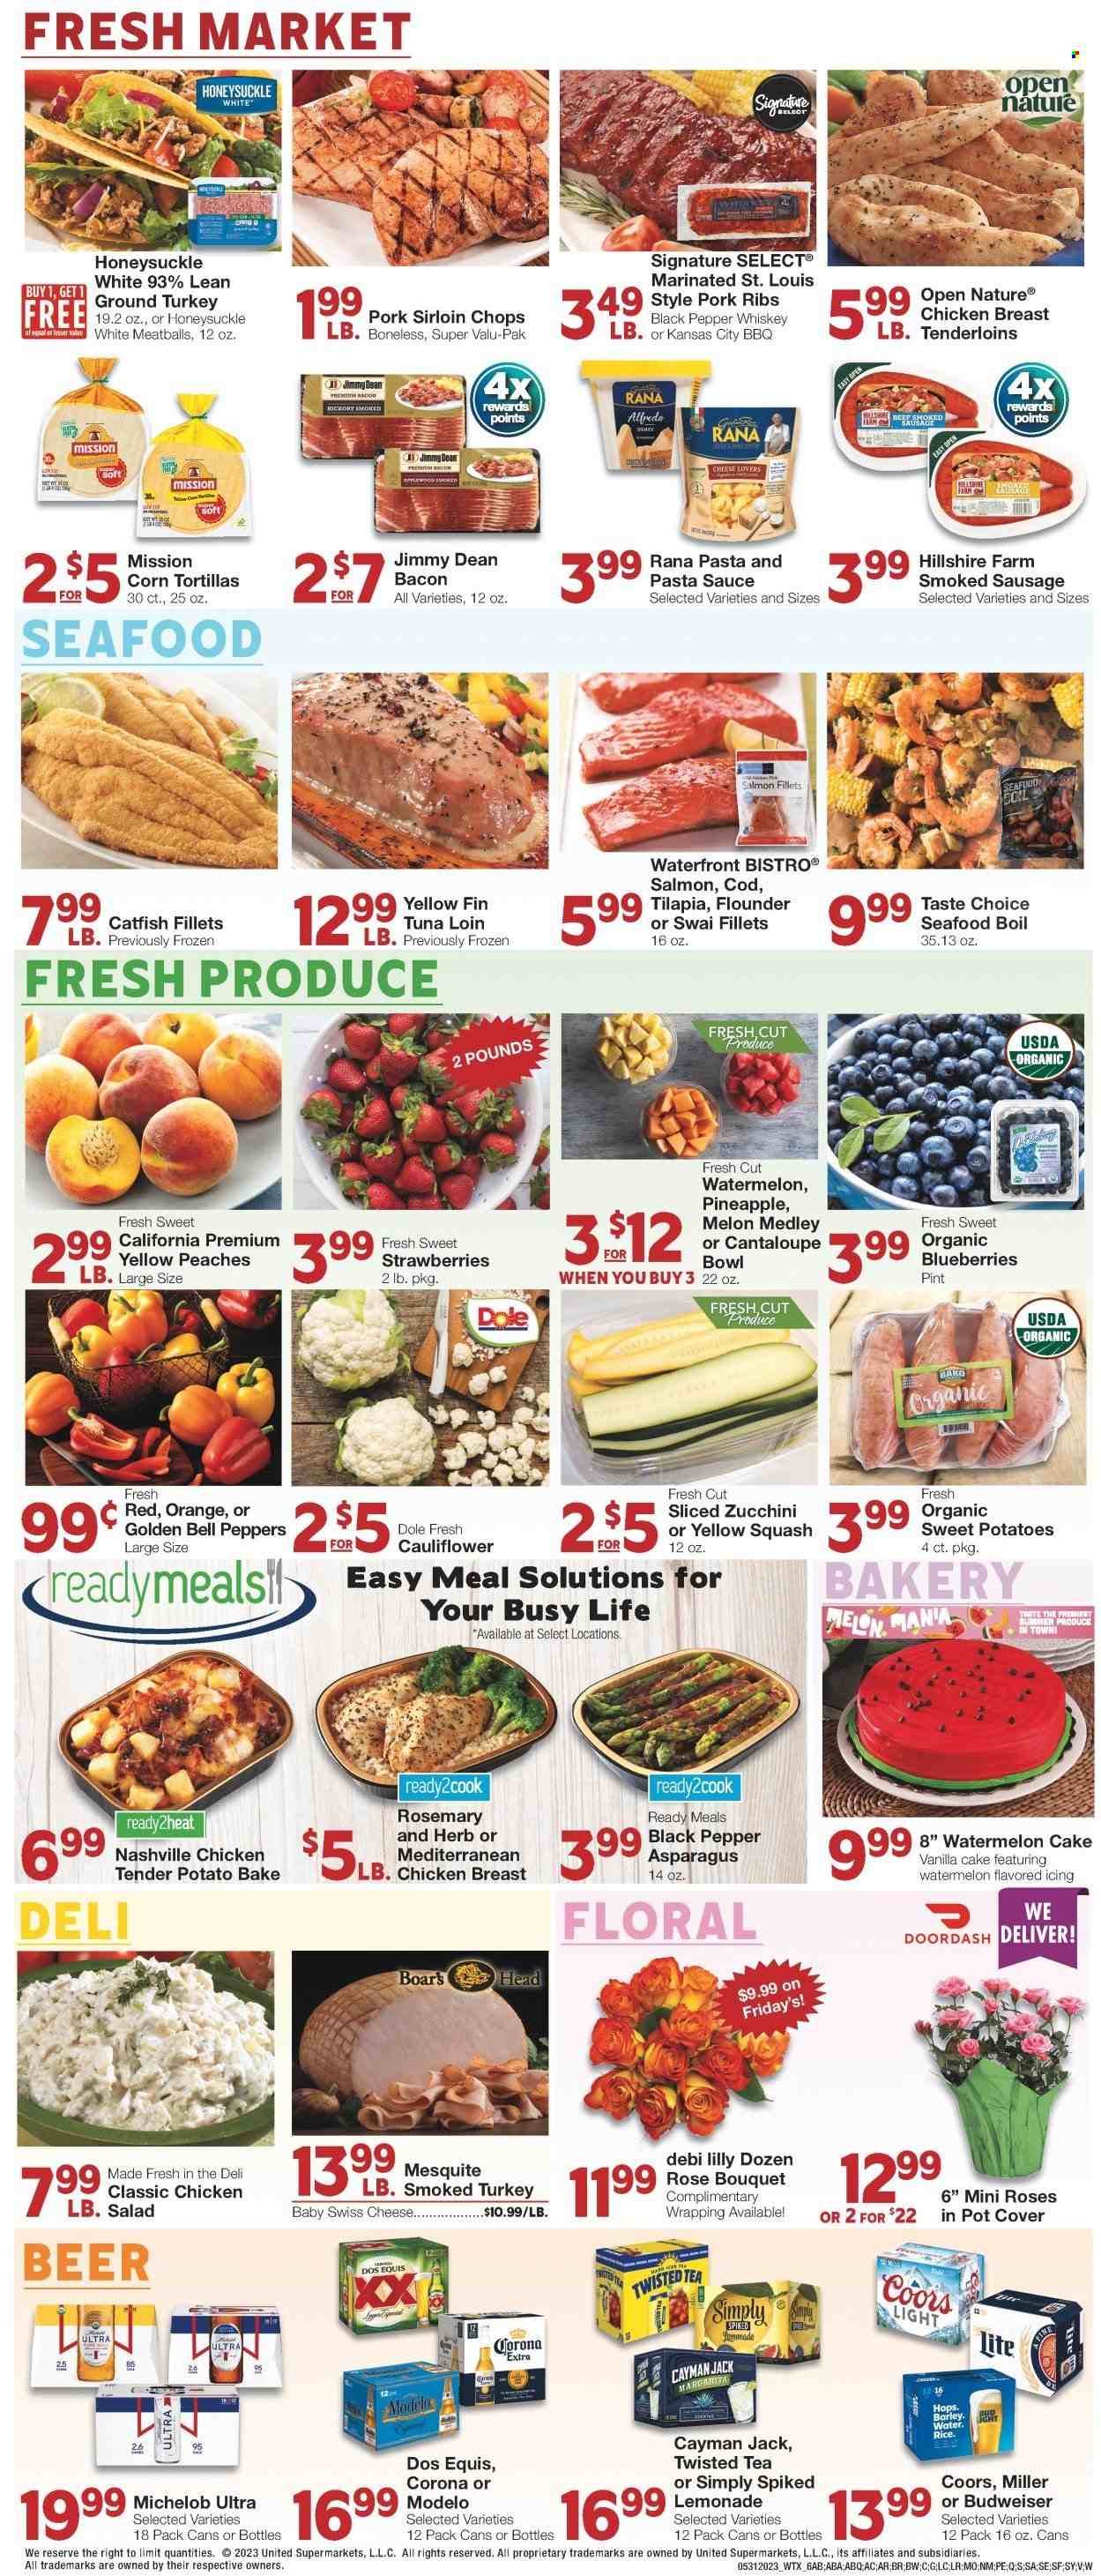 thumbnail - United Supermarkets Flyer - 05/31/2023 - 06/06/2023 - Sales products - corn tortillas, tortillas, cake, asparagus, bell peppers, cauliflower, sweet potato, zucchini, salad, Dole, peppers, yellow squash, blueberries, strawberries, peaches, ground turkey, chicken breasts, chicken, turkey, ribs, pork loin, pork meat, pork ribs, catfish, cod, flounder, salmon, salmon fillet, tilapia, tuna, seafood, seafood boil, swai fillet, pasta sauce, meatballs, sauce, Rana, Jimmy Dean, bacon, Hillshire Farm, smoked sausage, swiss cheese, cheese, Nature Fresh, rosemary, black pepper, herbs, lemonade, ice tea, water, alcohol, whiskey, whisky, Corona Extra, Modelo, bowl, Budweiser, melons, Coors, Dos Equis, Twisted Tea, Michelob. Page 6.